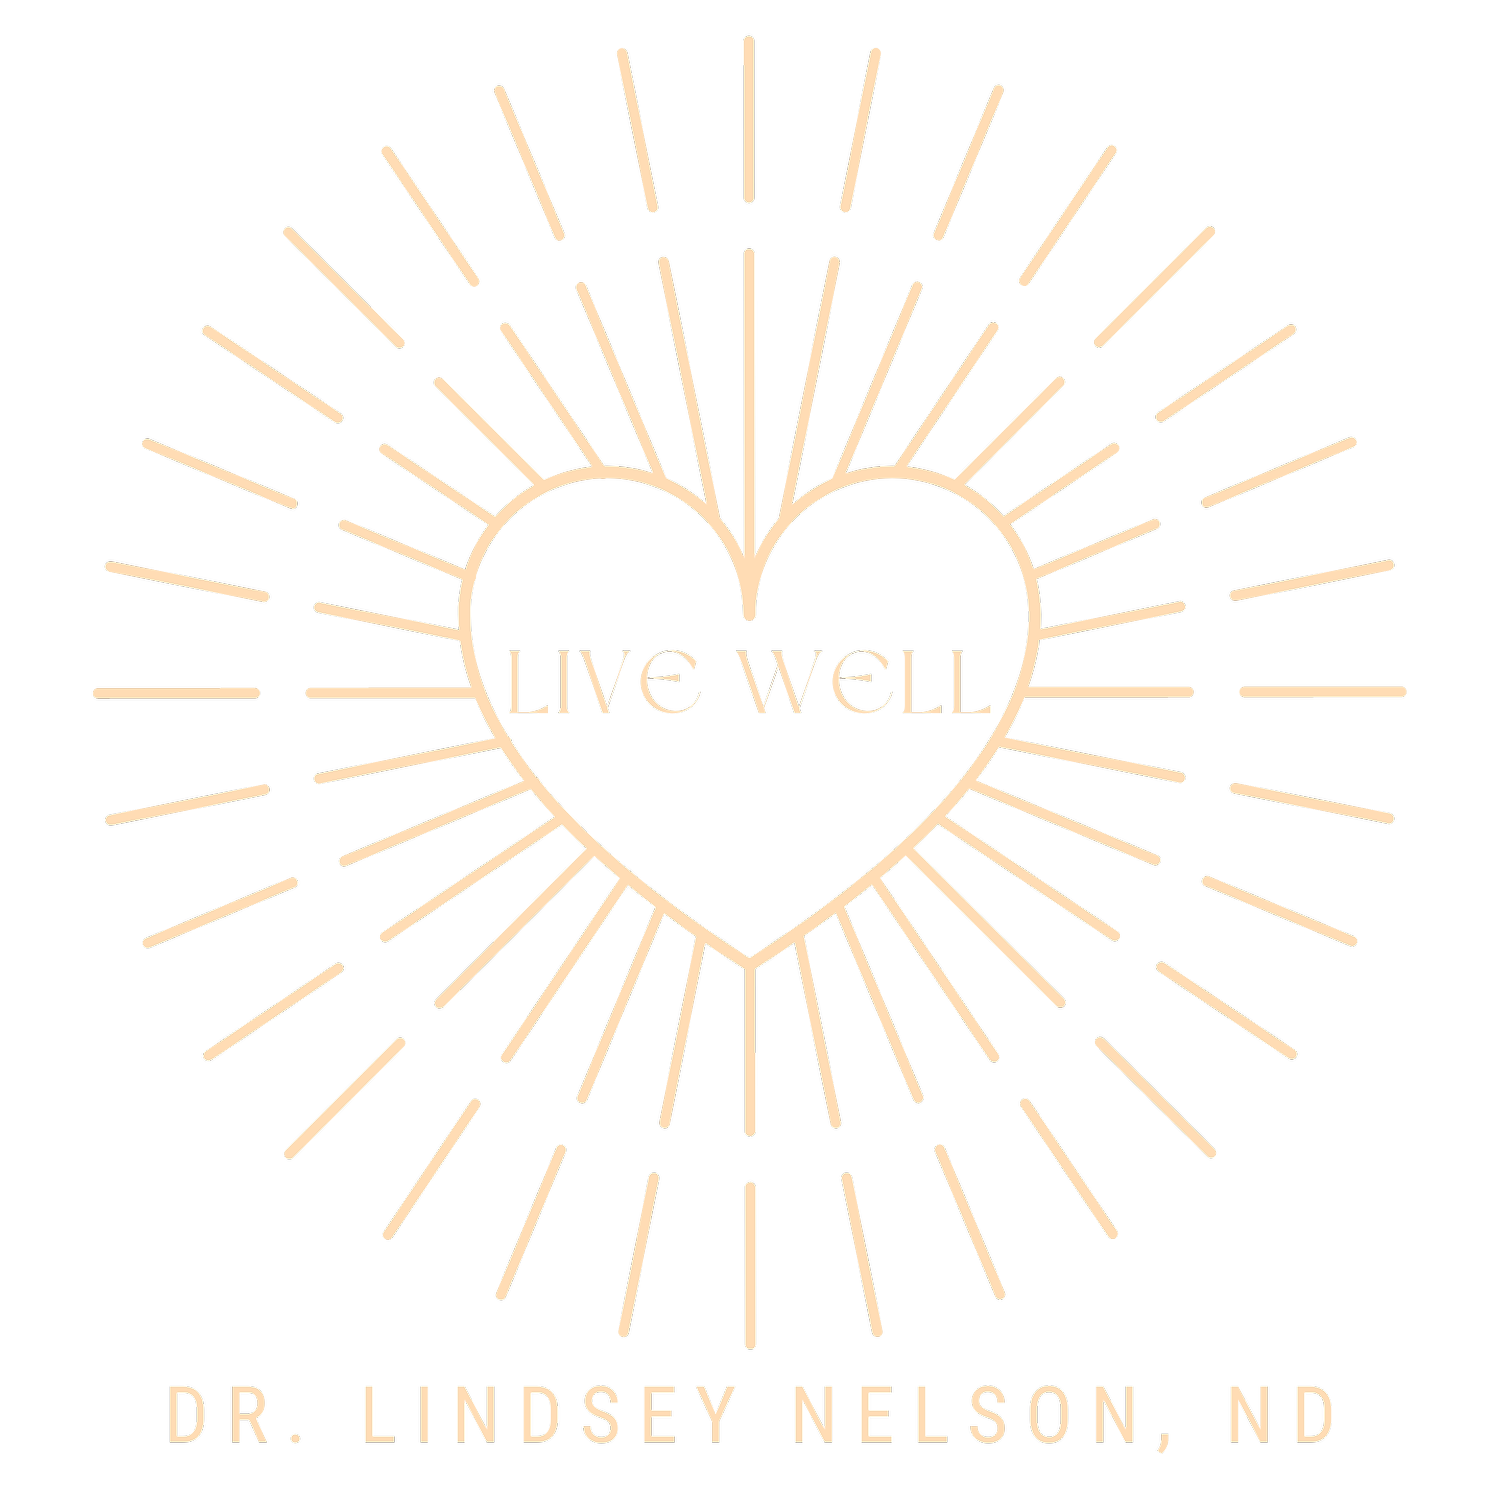 Dr. Lindsey Nelson, ND